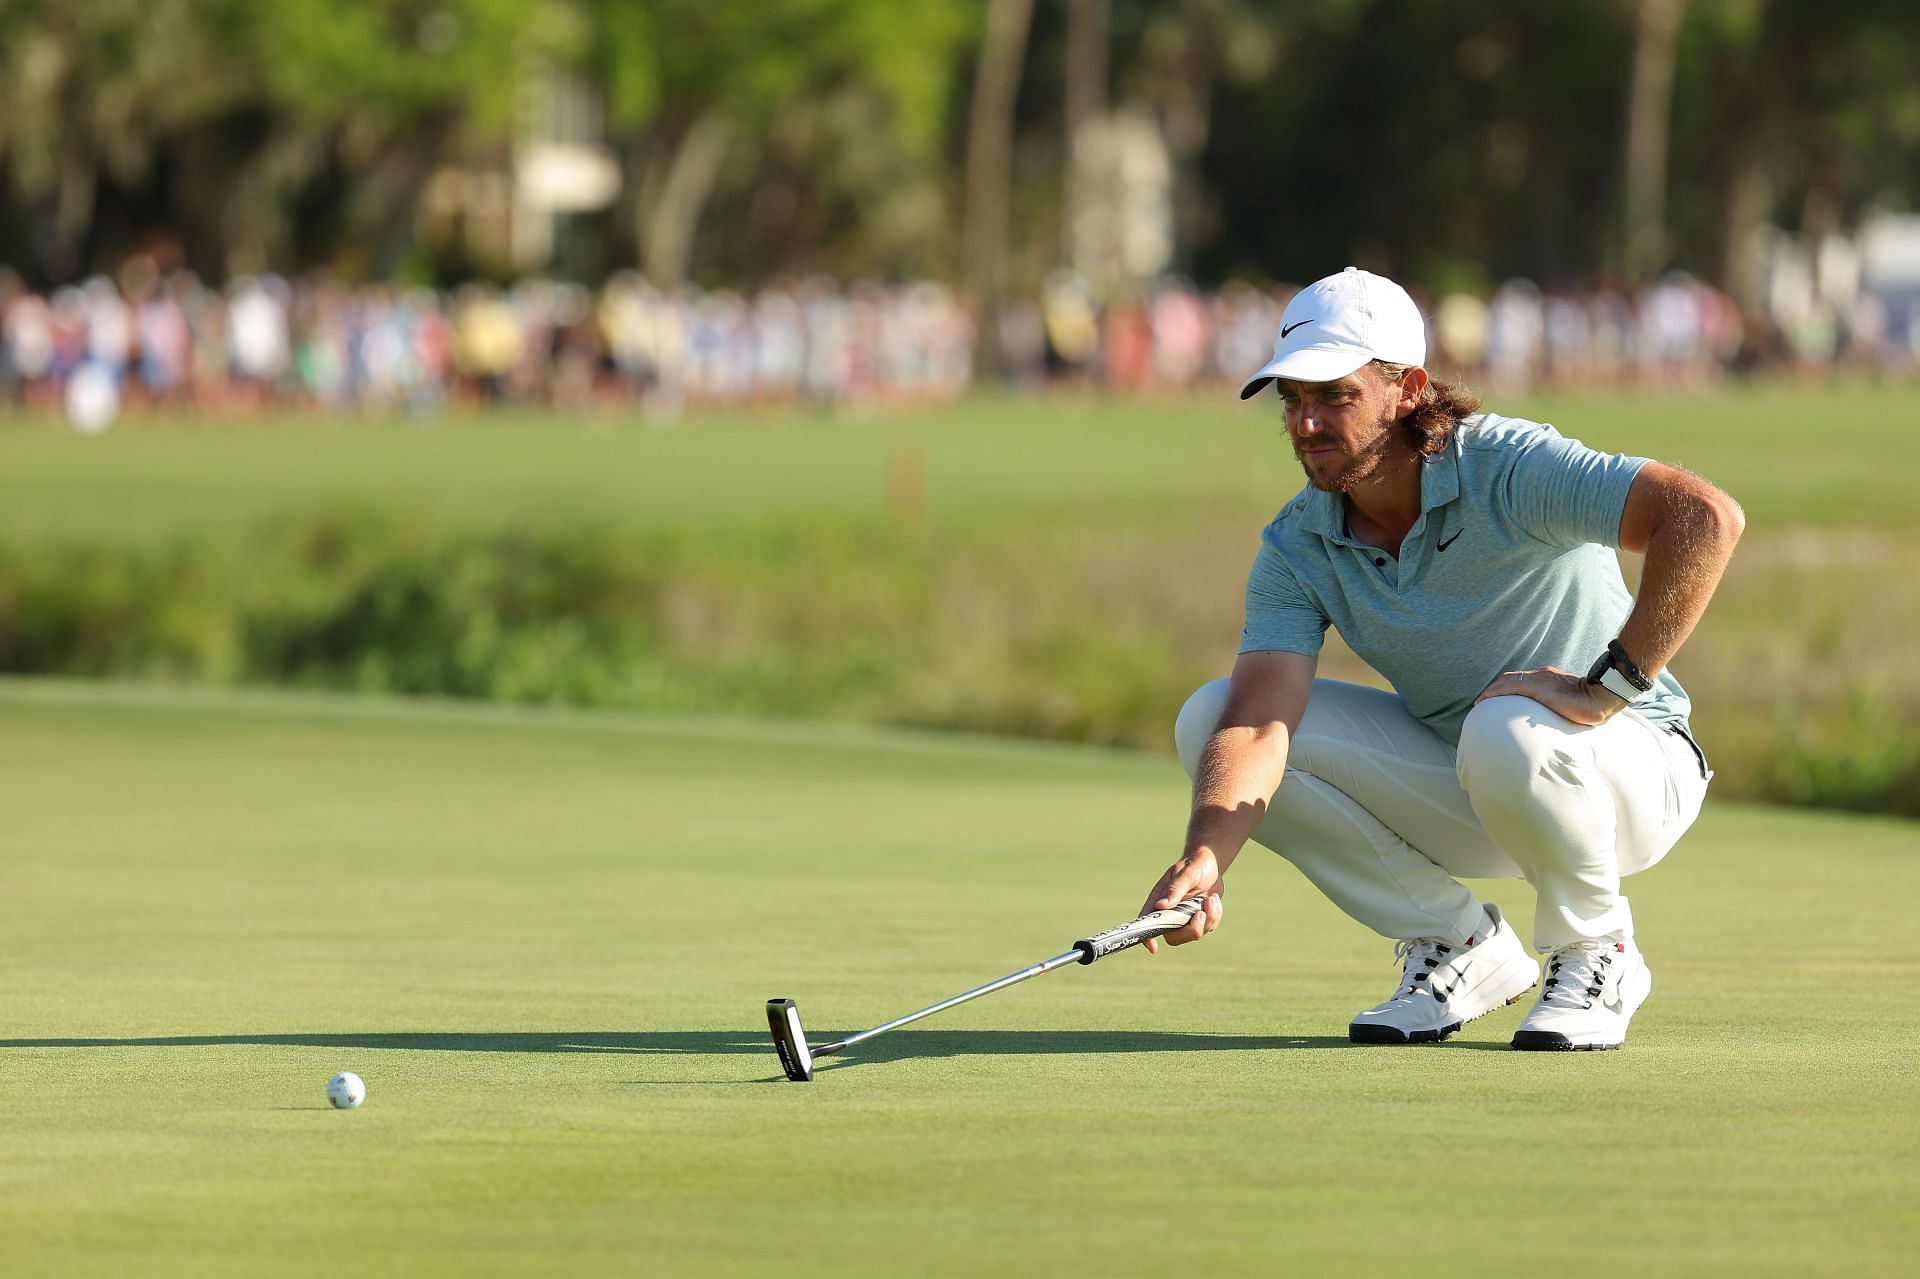 Tommy Fleetwood earned $15 million in his career